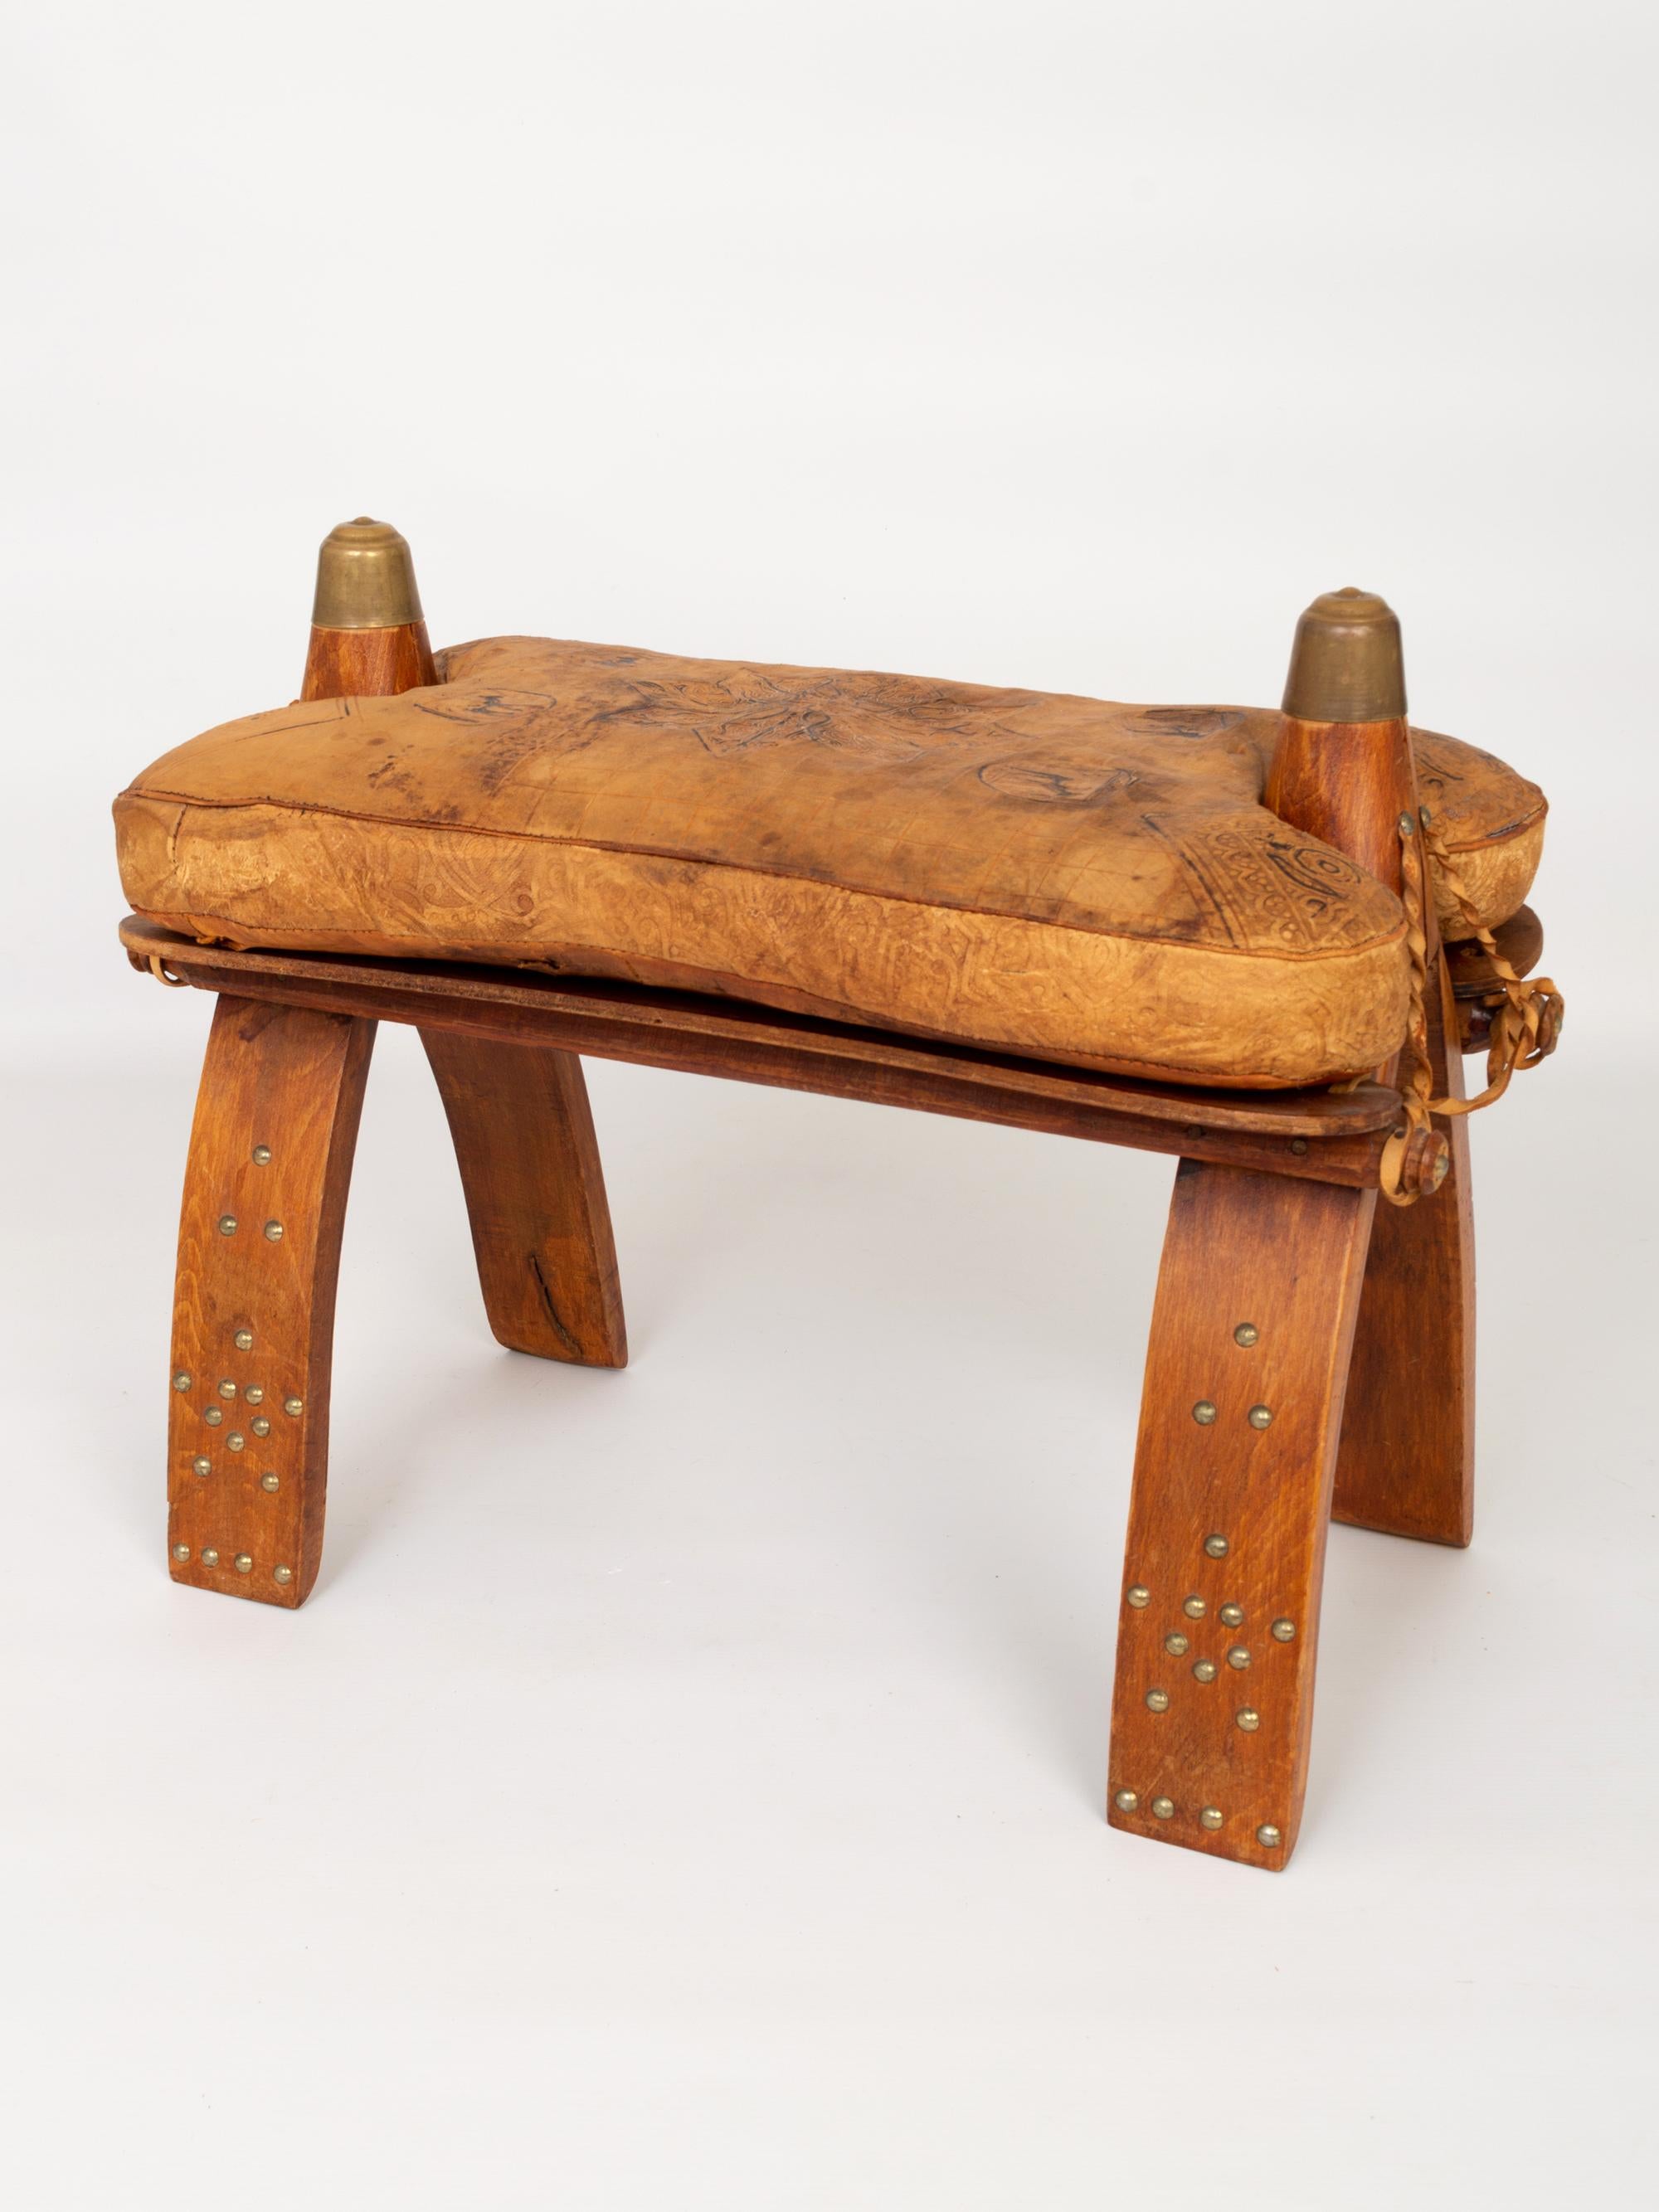 A Vintage camel leather saddle stool ottoman, Morocco C.1960.
In very good vintage condition commensurate of age.